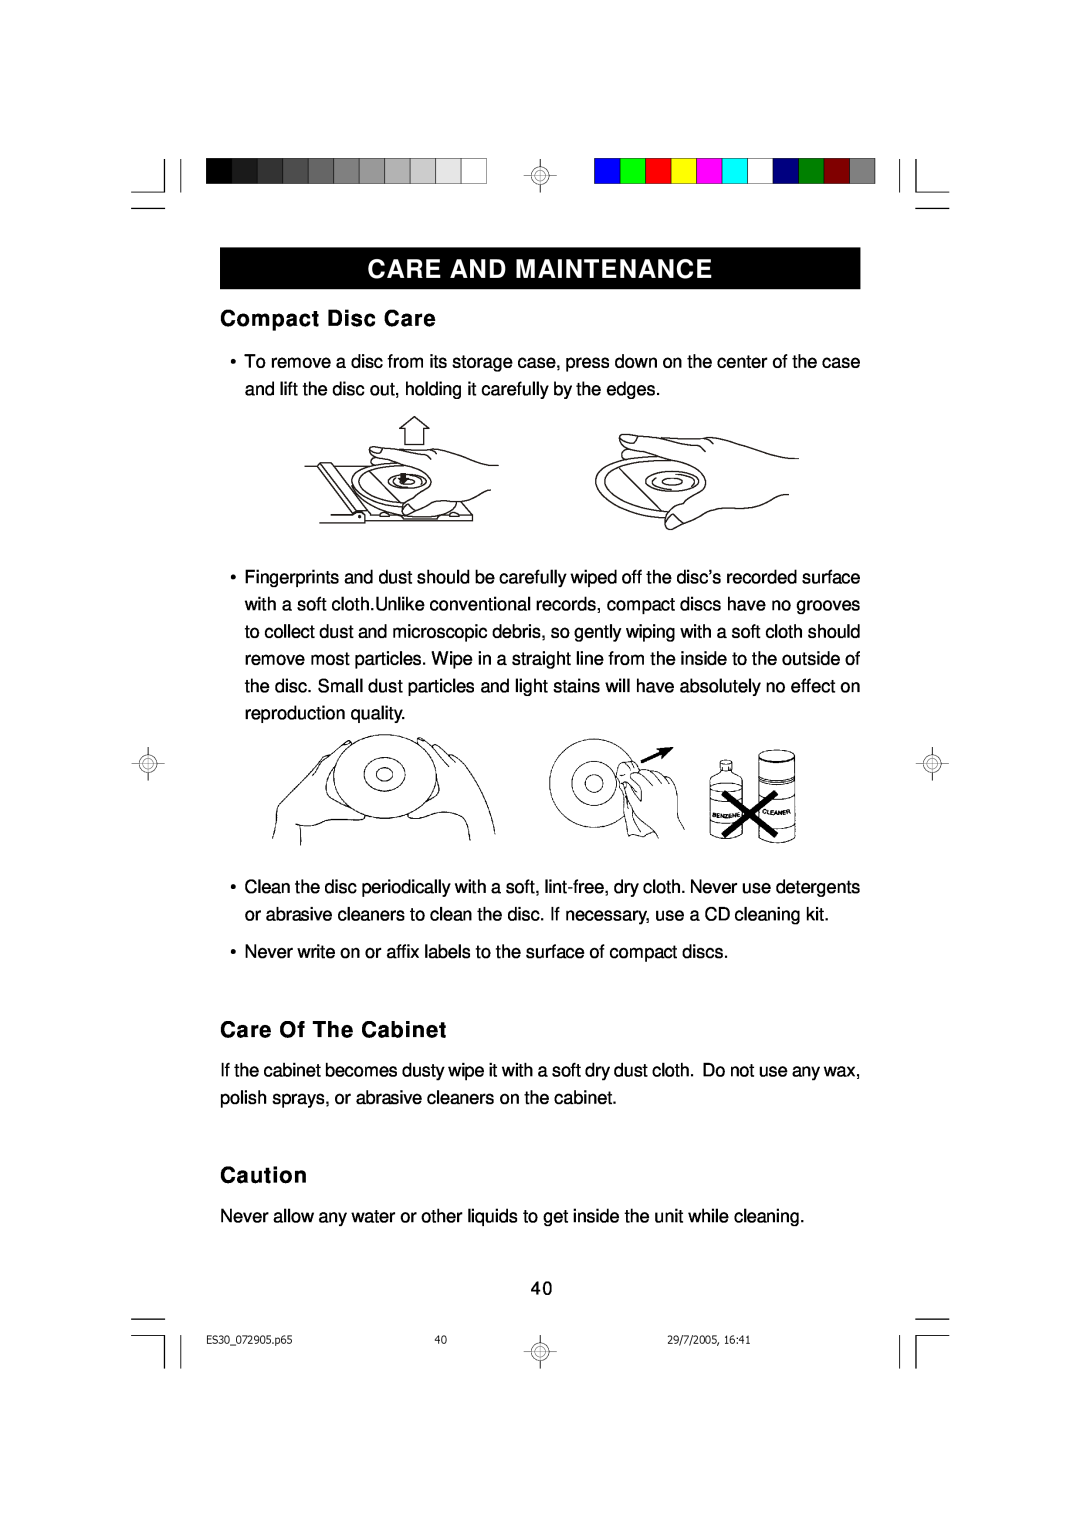 Emerson Process Management ES30 owner manual Care And Maintenance, Compact Disc Care, Care Of The Cabinet 